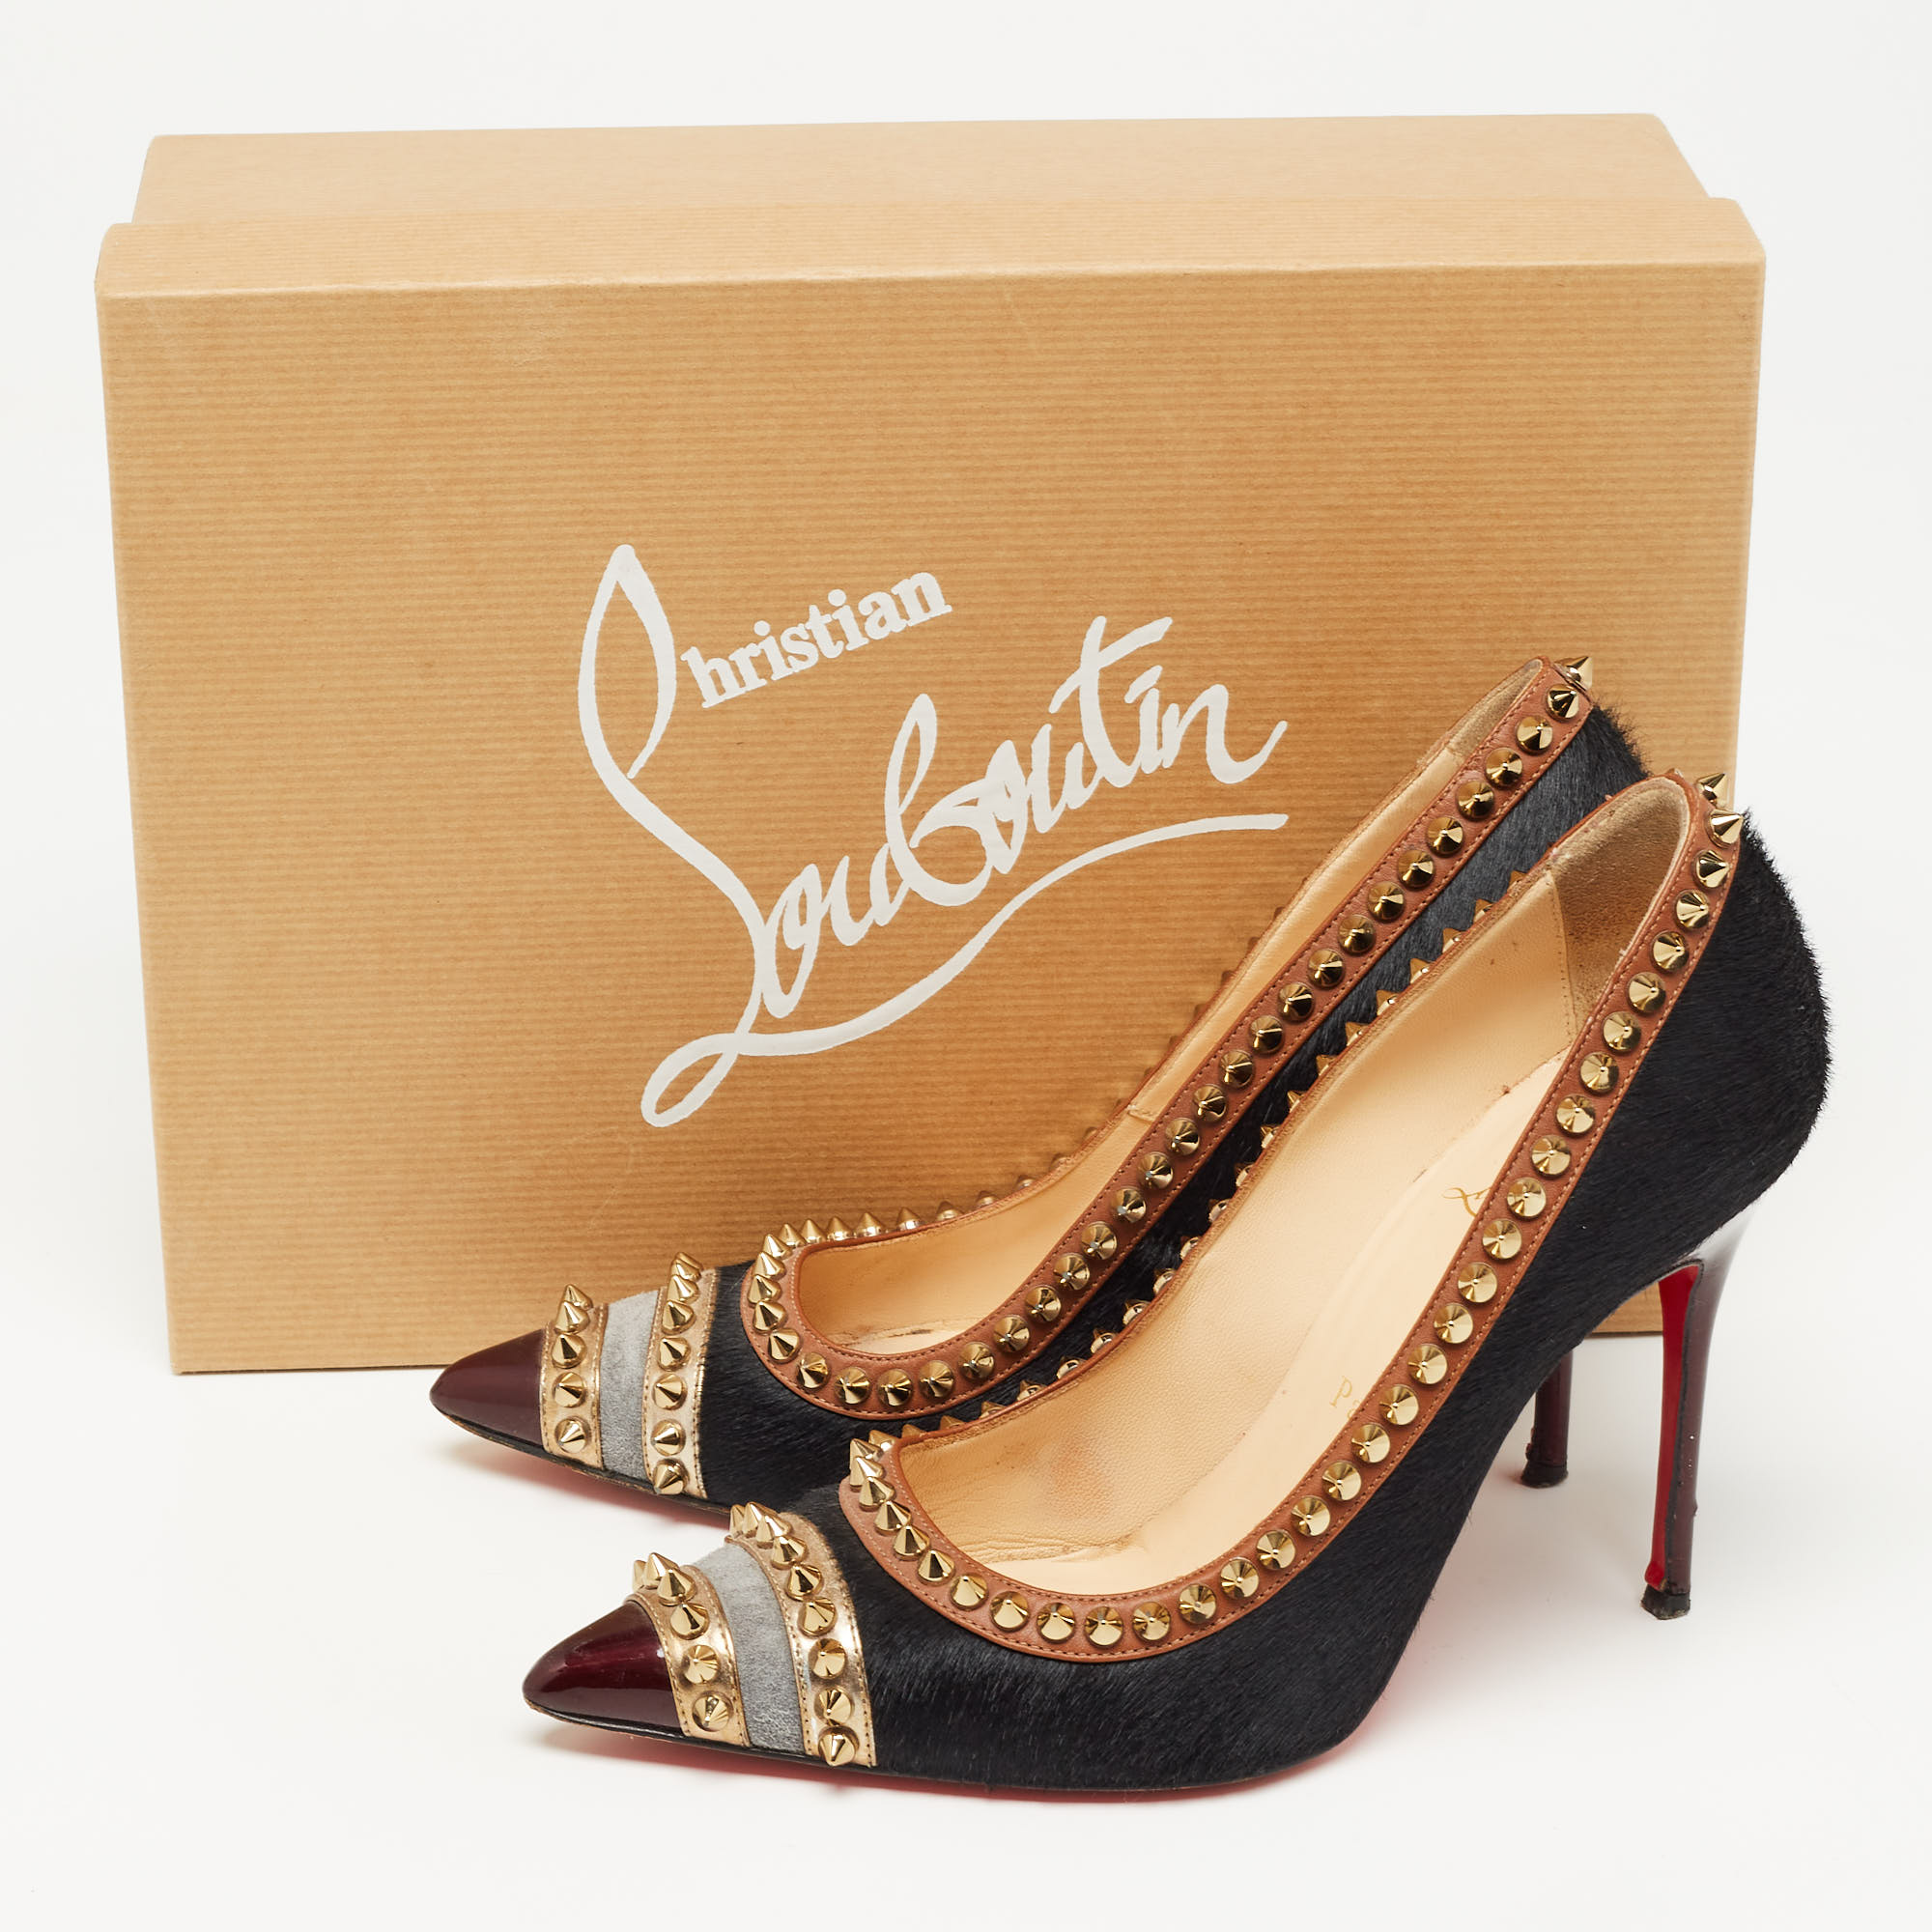 Christian Louboutin Black Calf Hair And Leather Malabar Hill Pumps Size 36